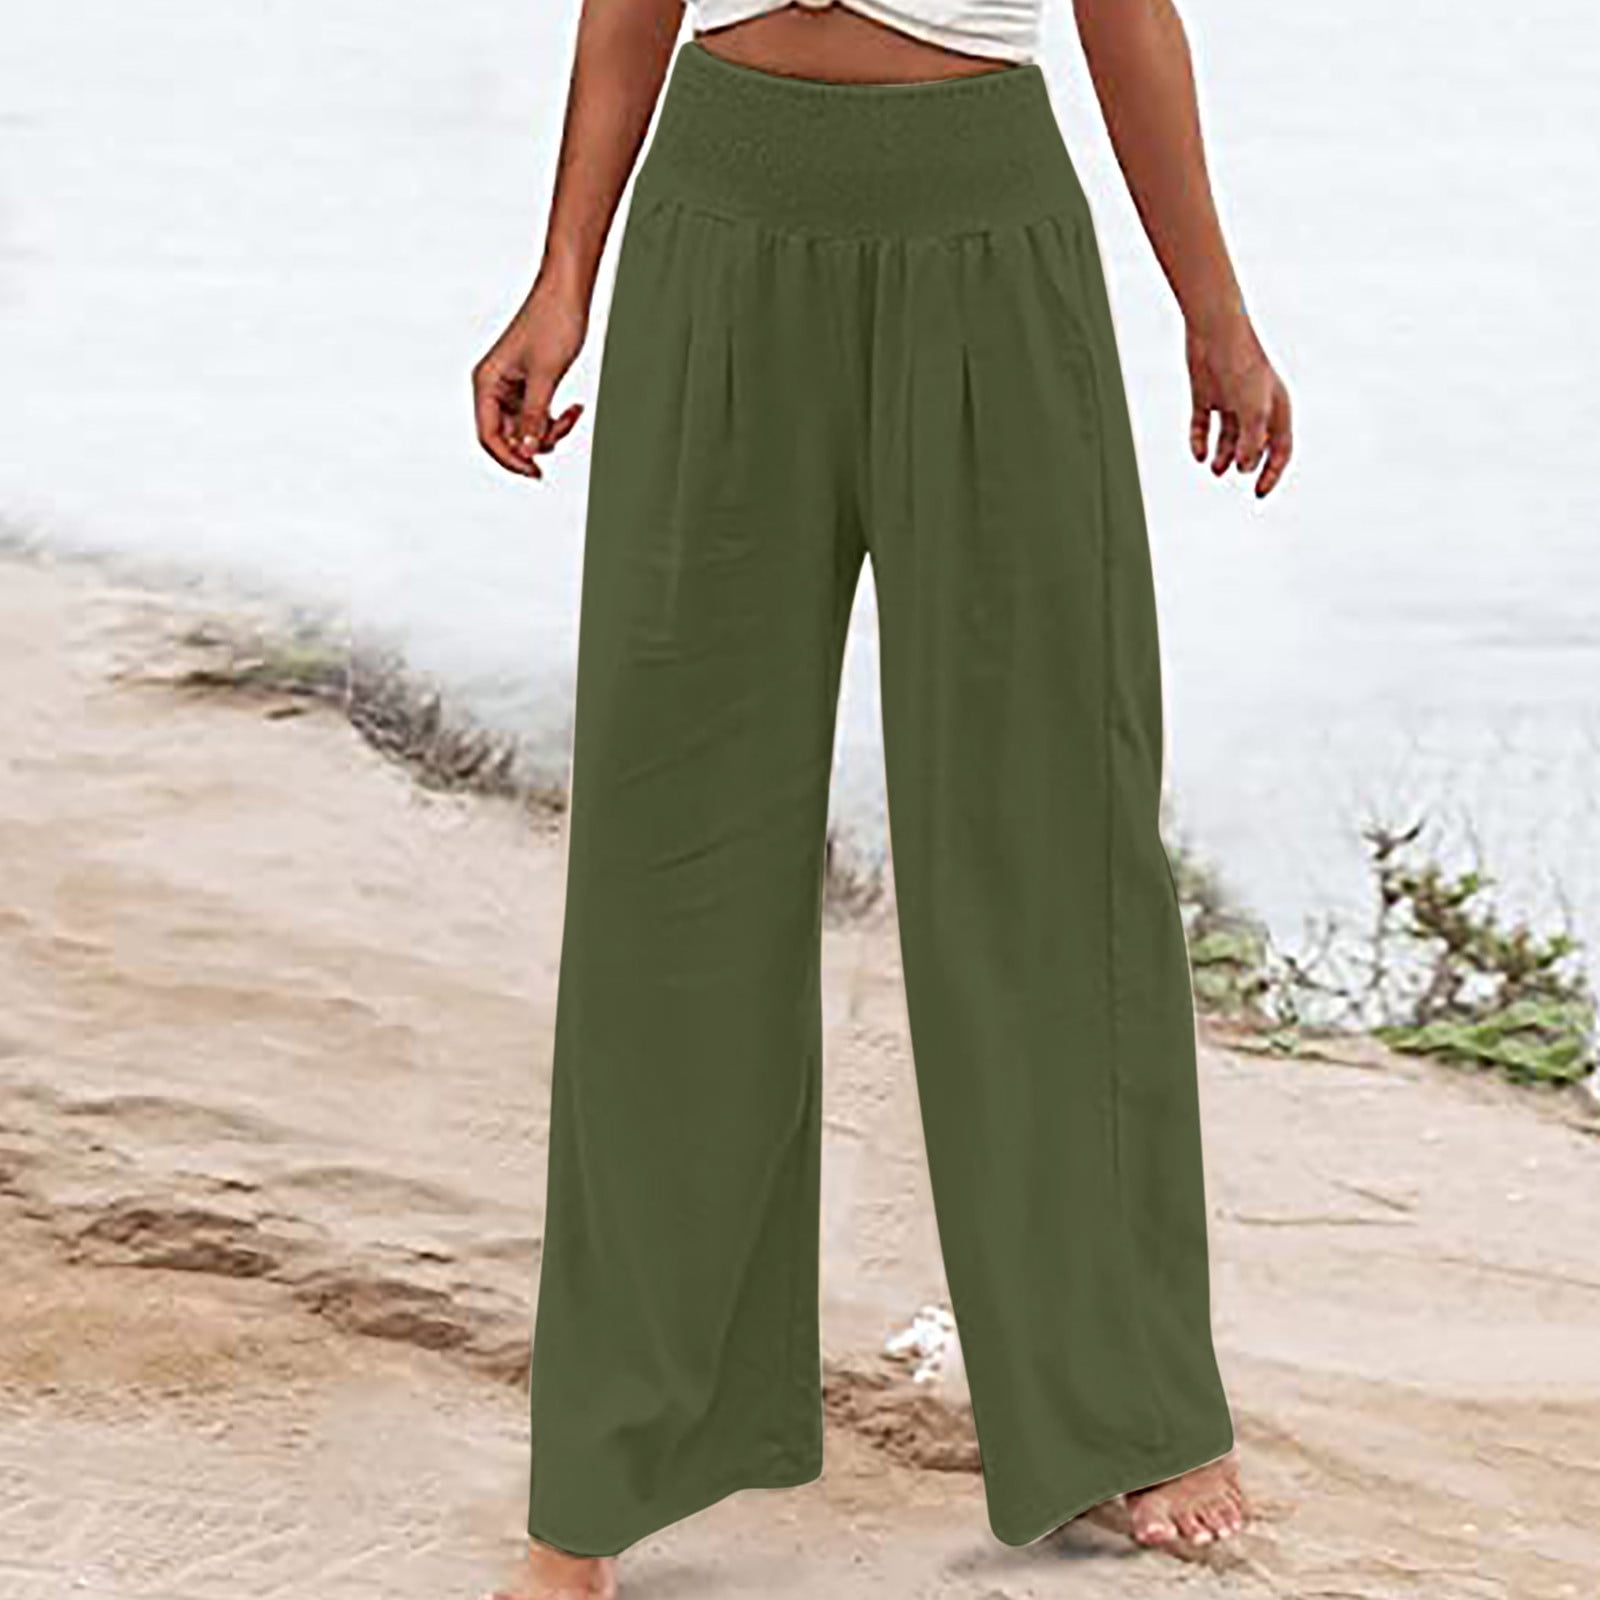 Solid Color Pleated Wide Leg Pants for Women Elastric High Waist